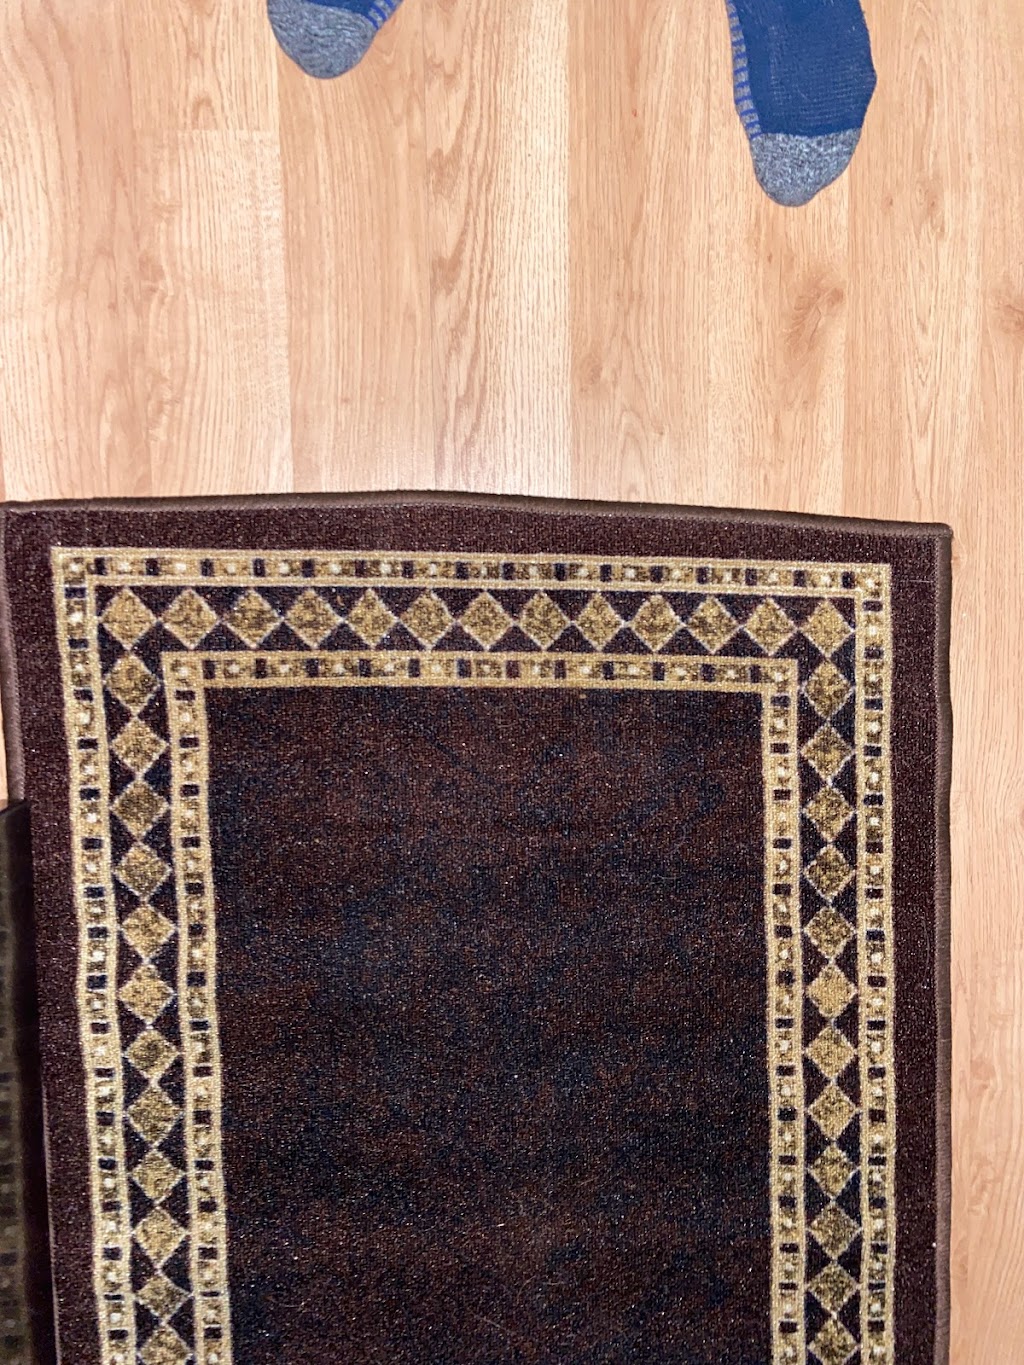 Antep Rugs Inc. | 260 Walsh Dr Unit D, Parsippany-Troy Hills, NJ 07054 | Phone: (973) 396-9337